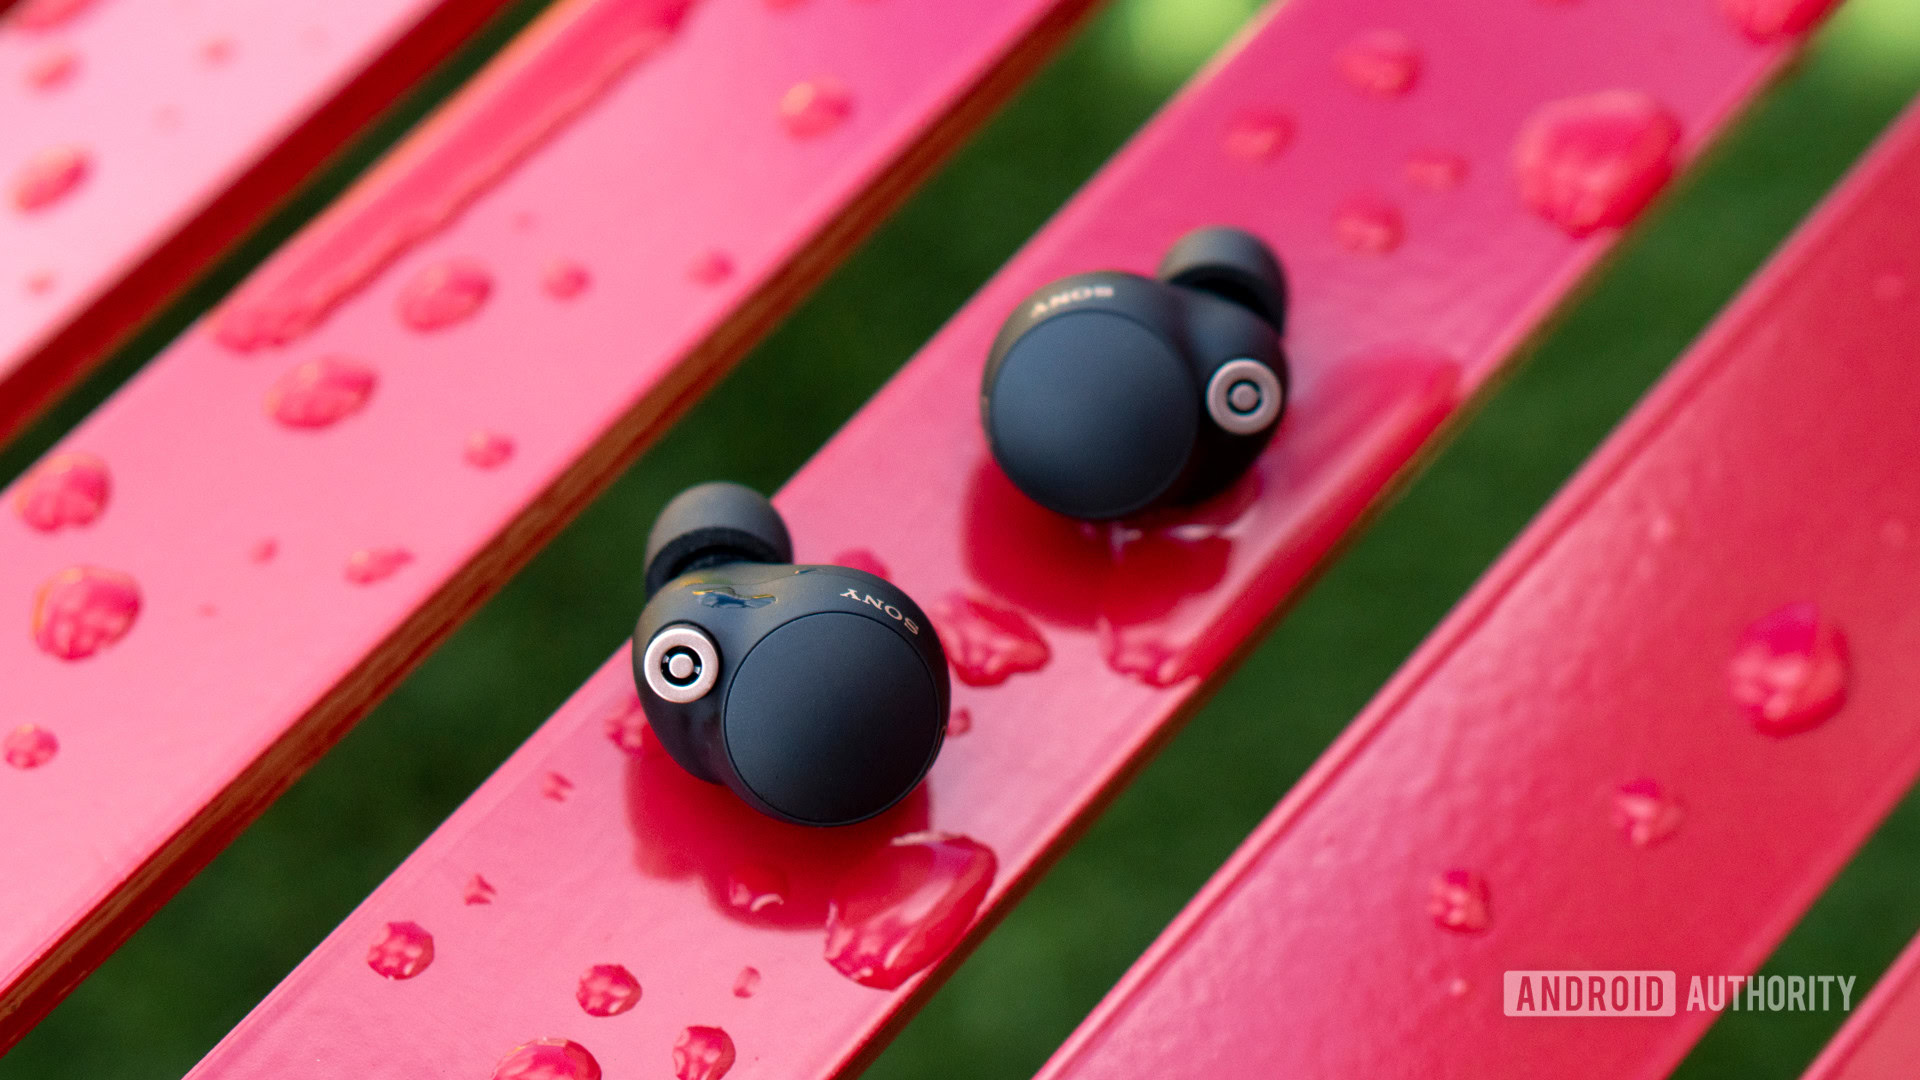 Sony WF-1000XM4 earbuds sitting outside of their case on a red bench covered with water droplets.